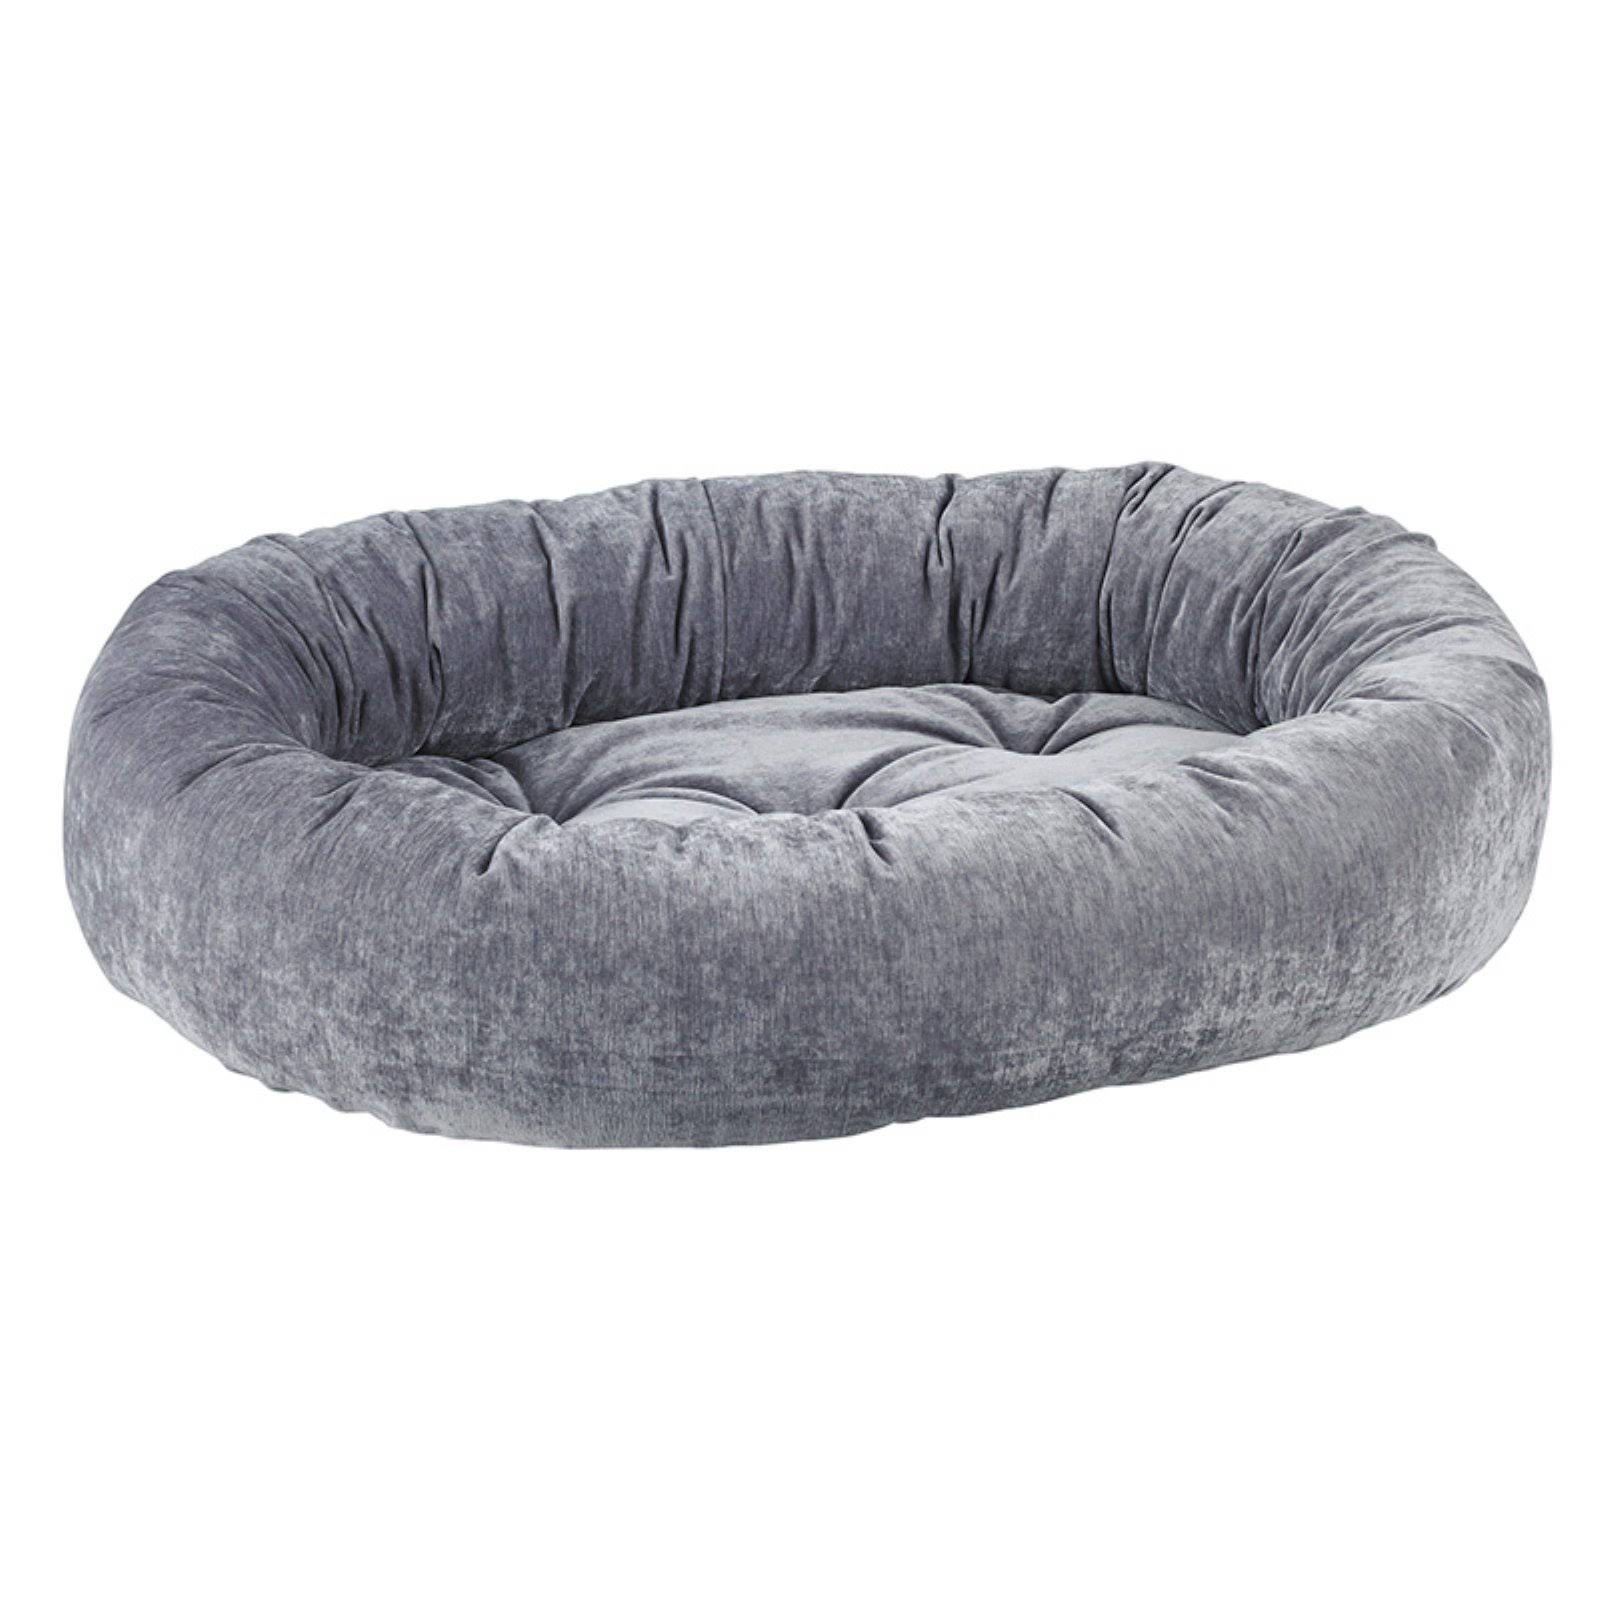 Bowsers Donut Bed - Pumice | Size: Medium